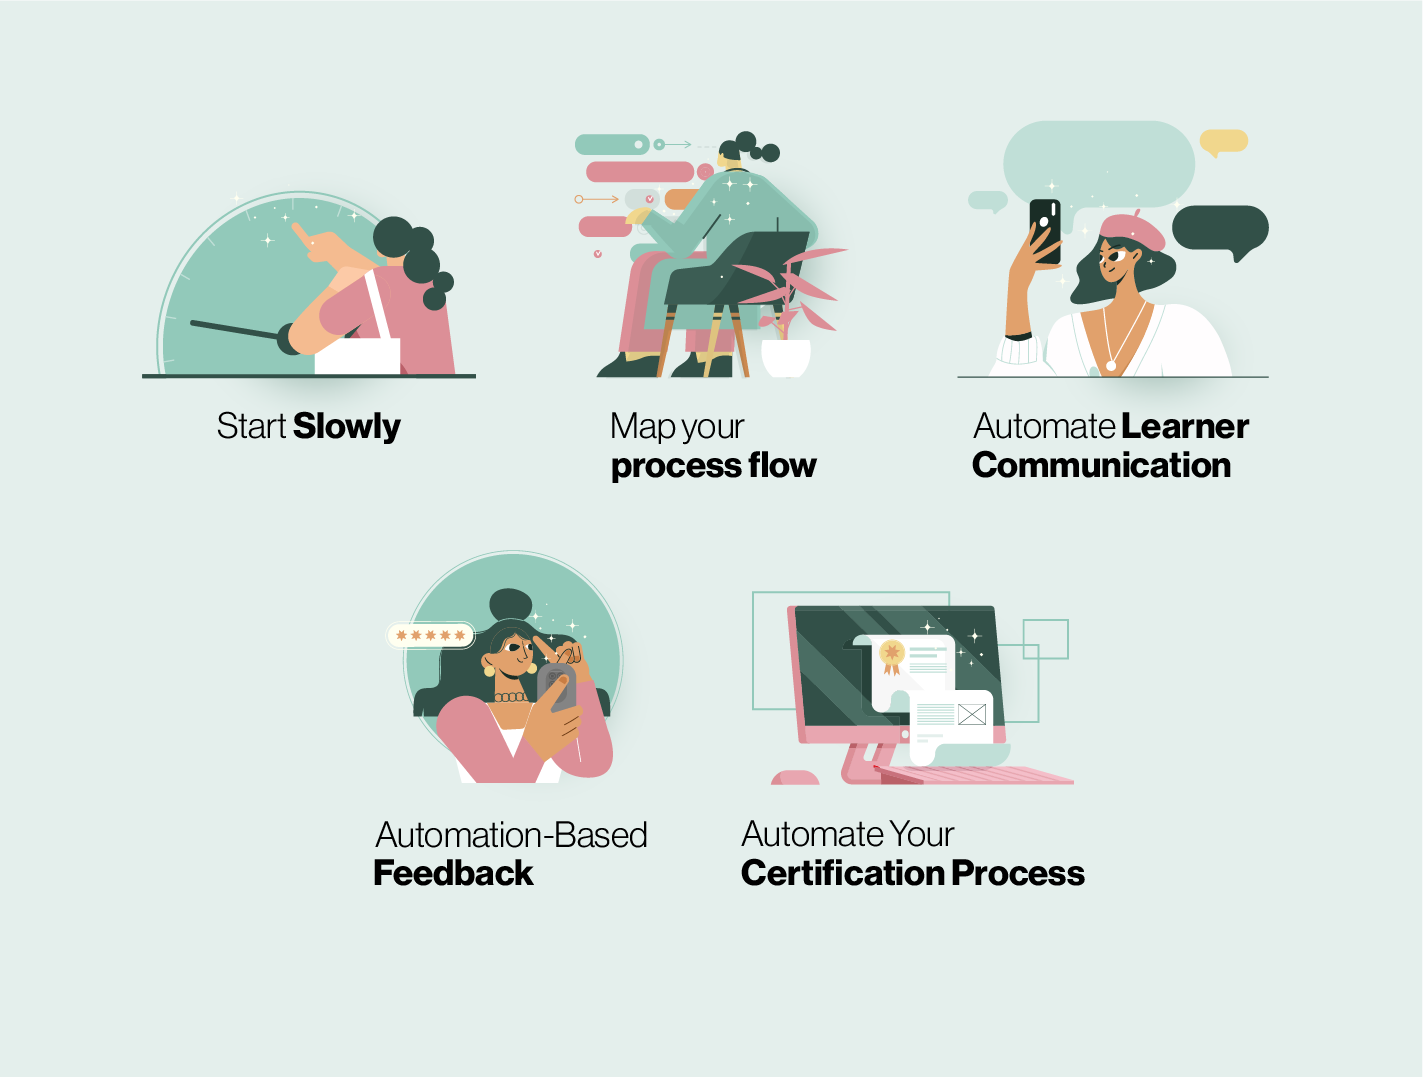 Tips to Automate eLearning Process